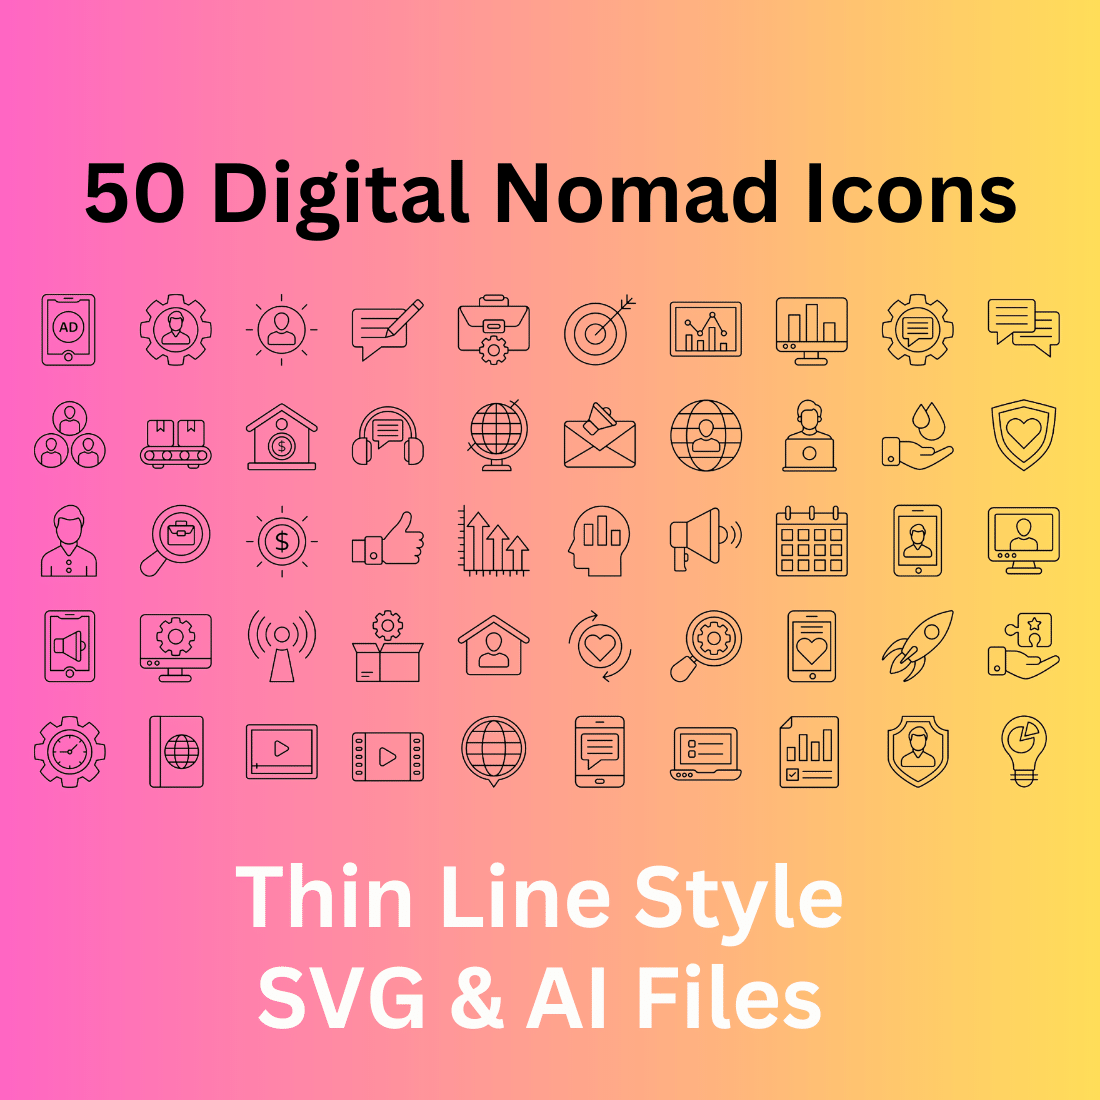 Digital Nomad Icon Set 50 Outline Icons - SVG And AI Files cover image.